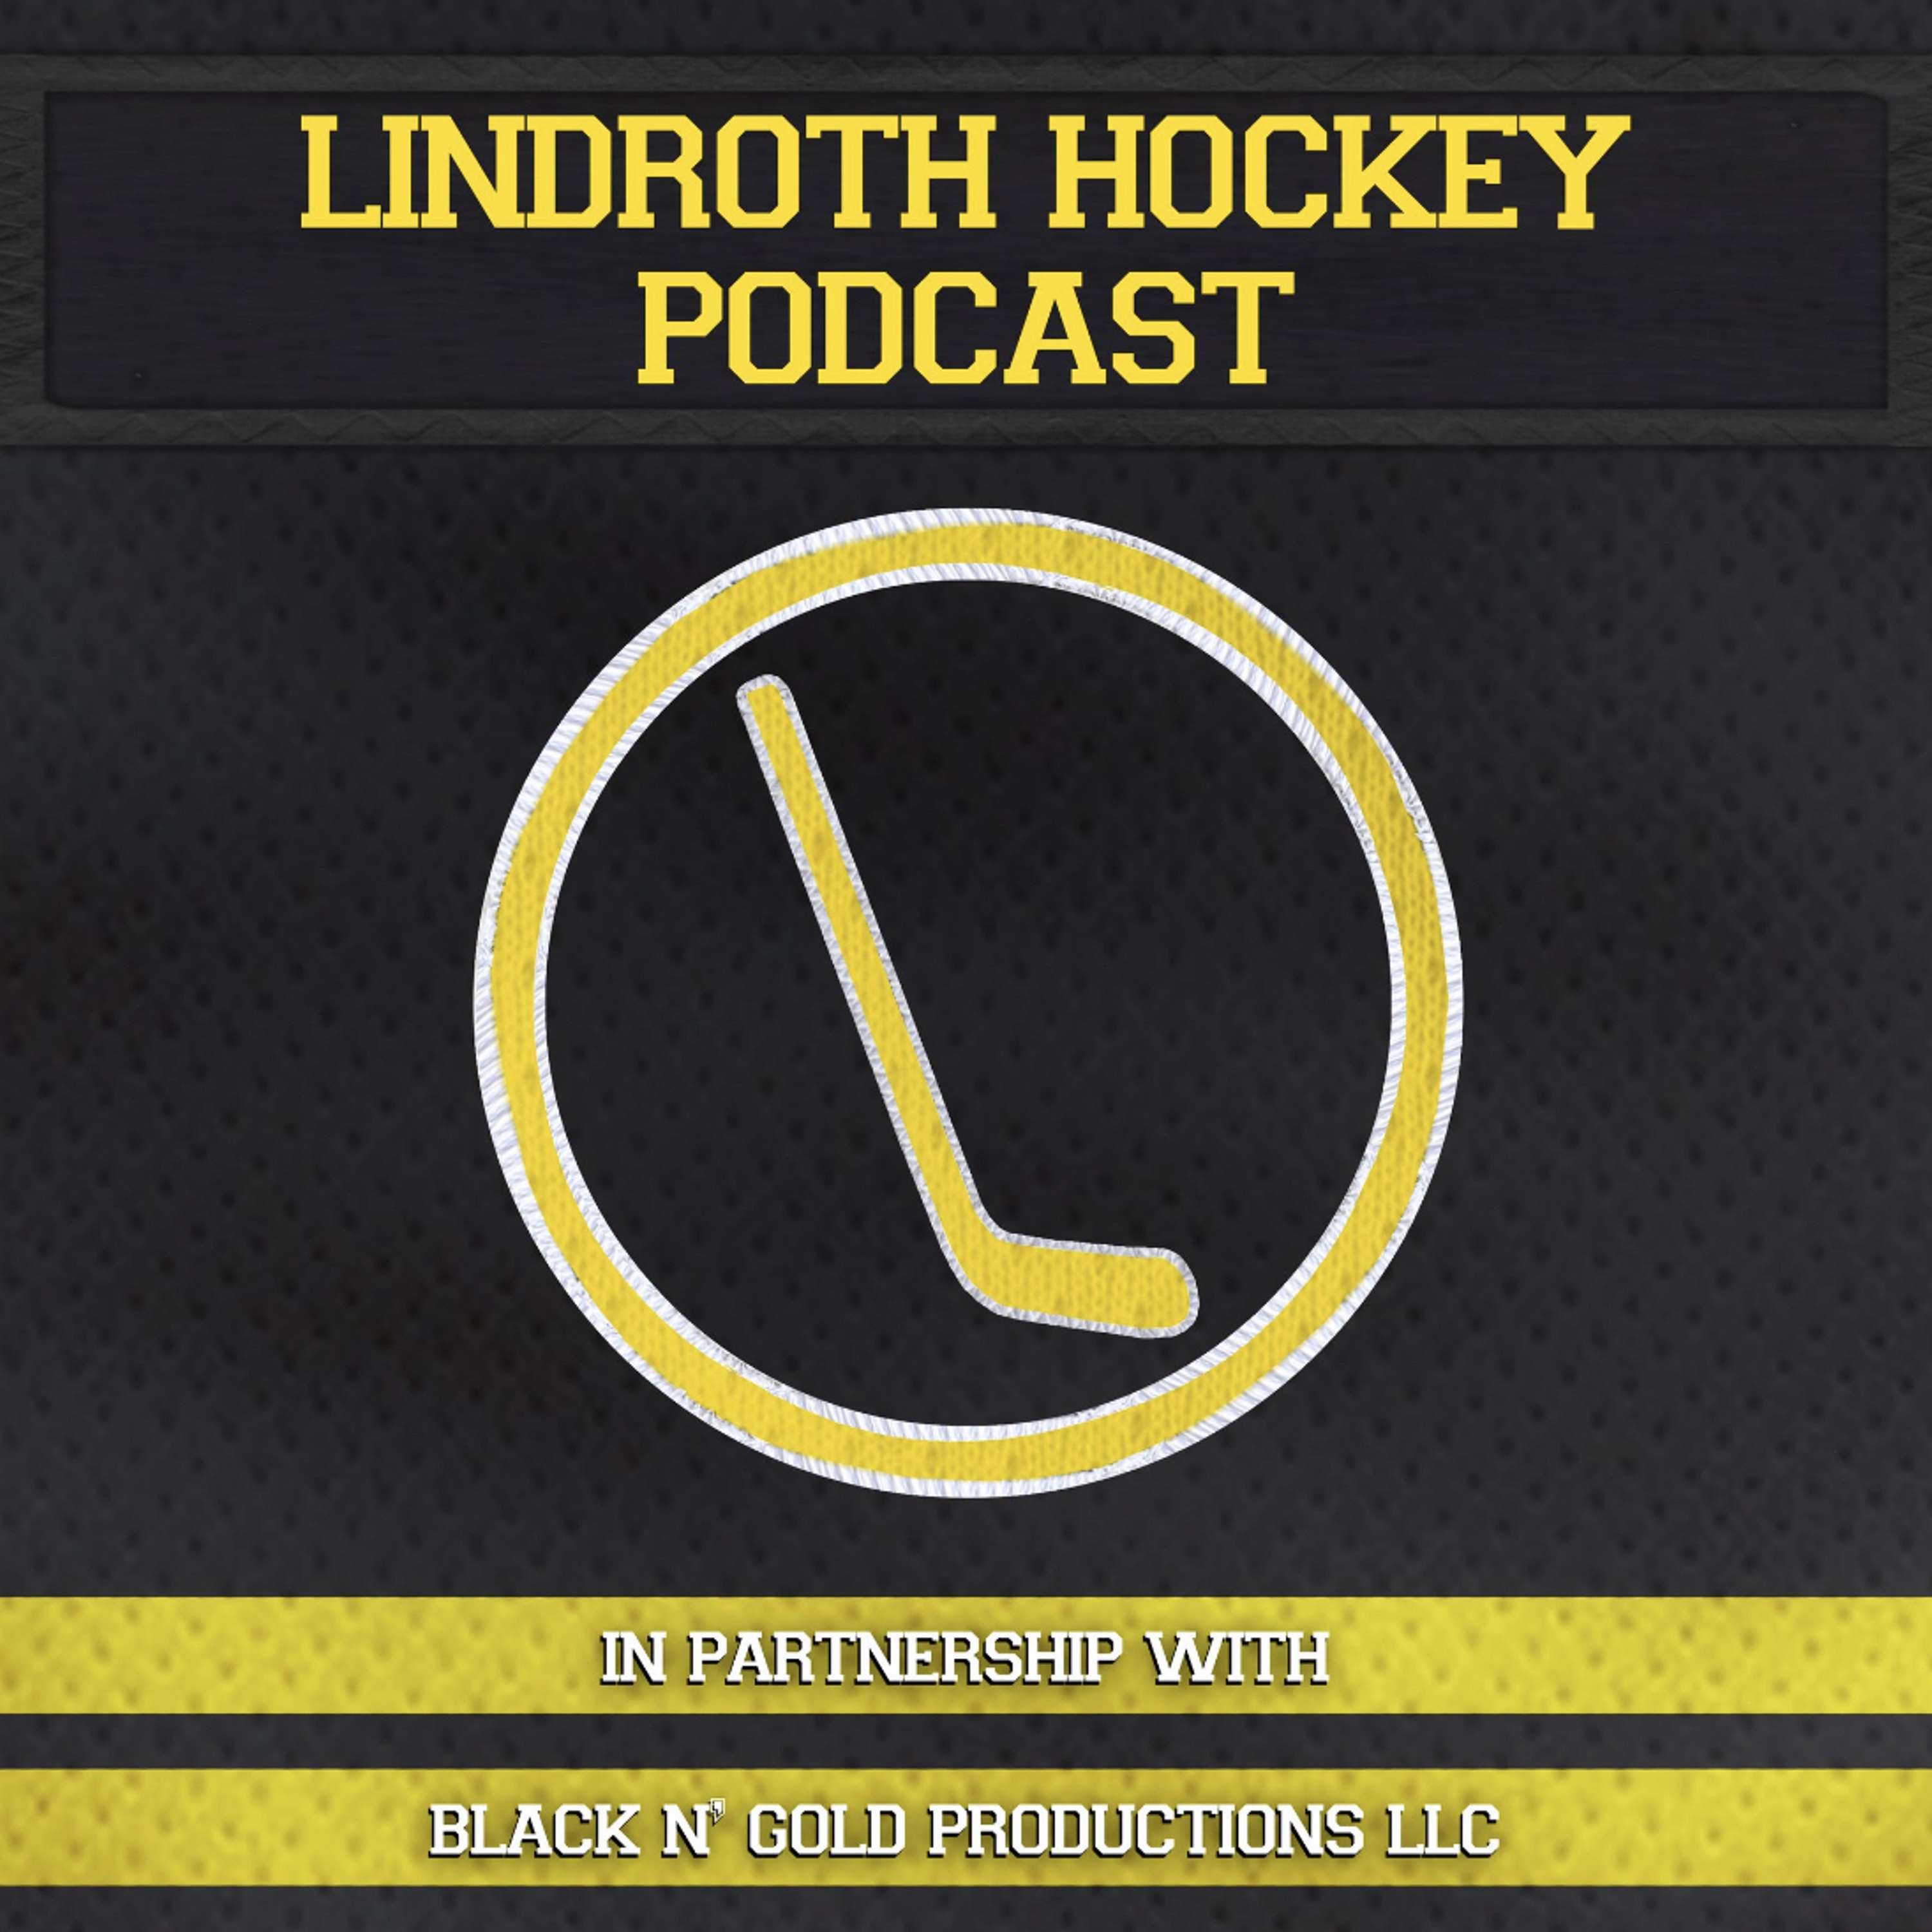 Episode 80: Boston Bruins talk with the Lindroth Boys